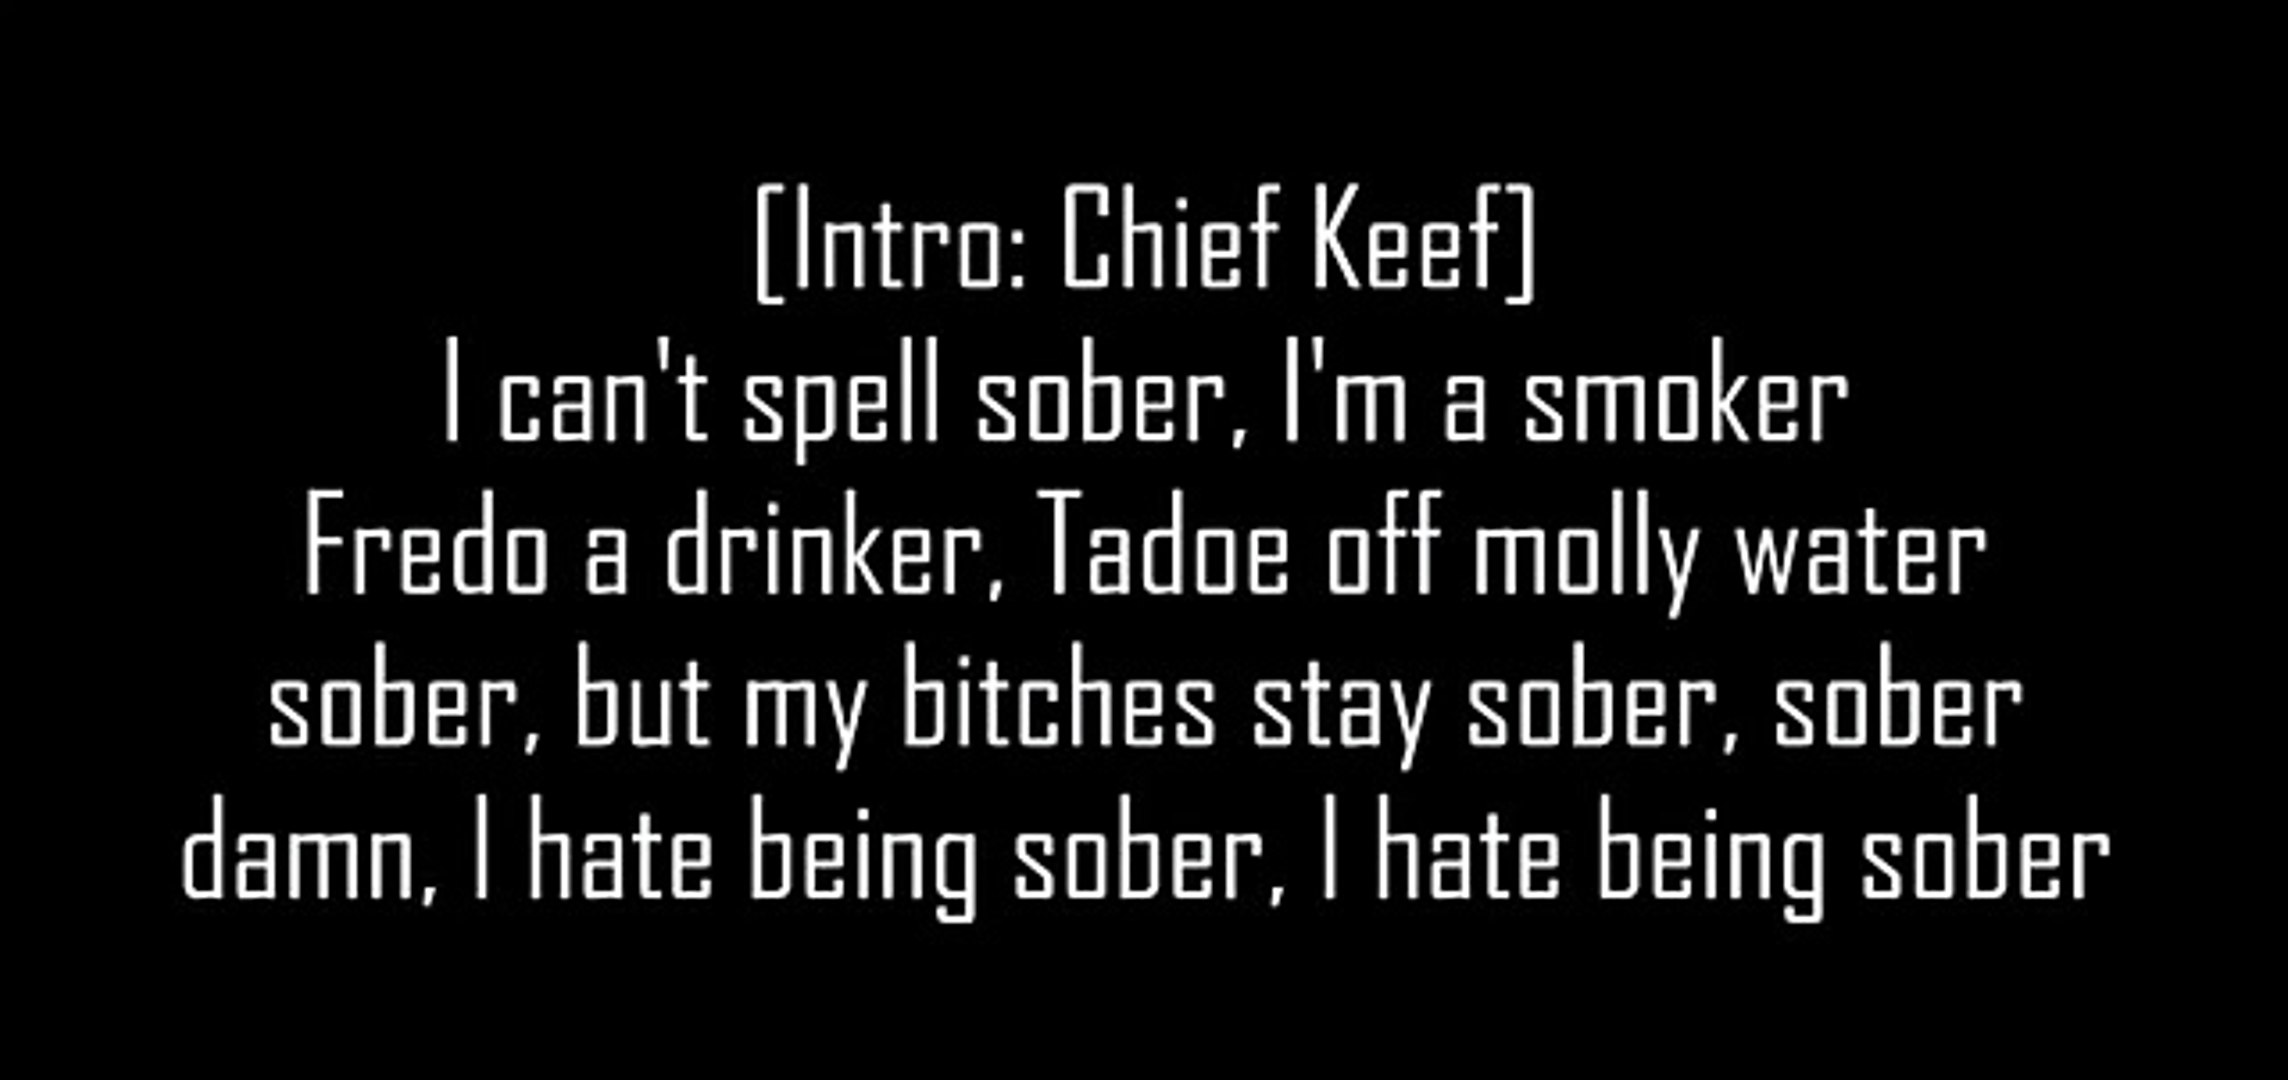 Hate being sober by chief keef lyrics - Vidéo Dailymotion